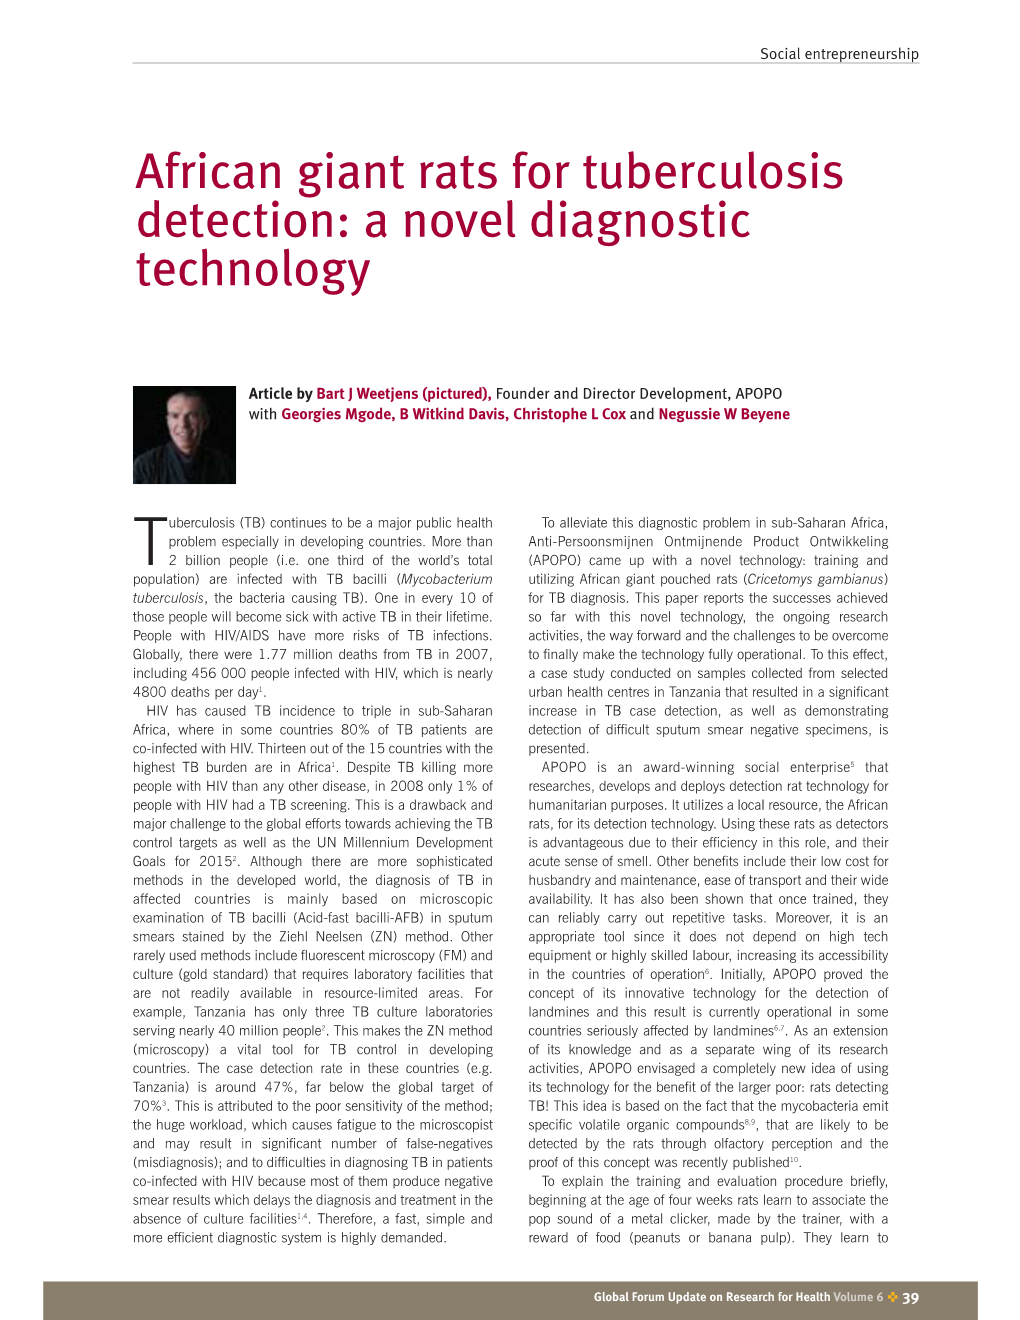 African Giant Rats for Tuberculosis Detection: a Novel Diagnostic Technology